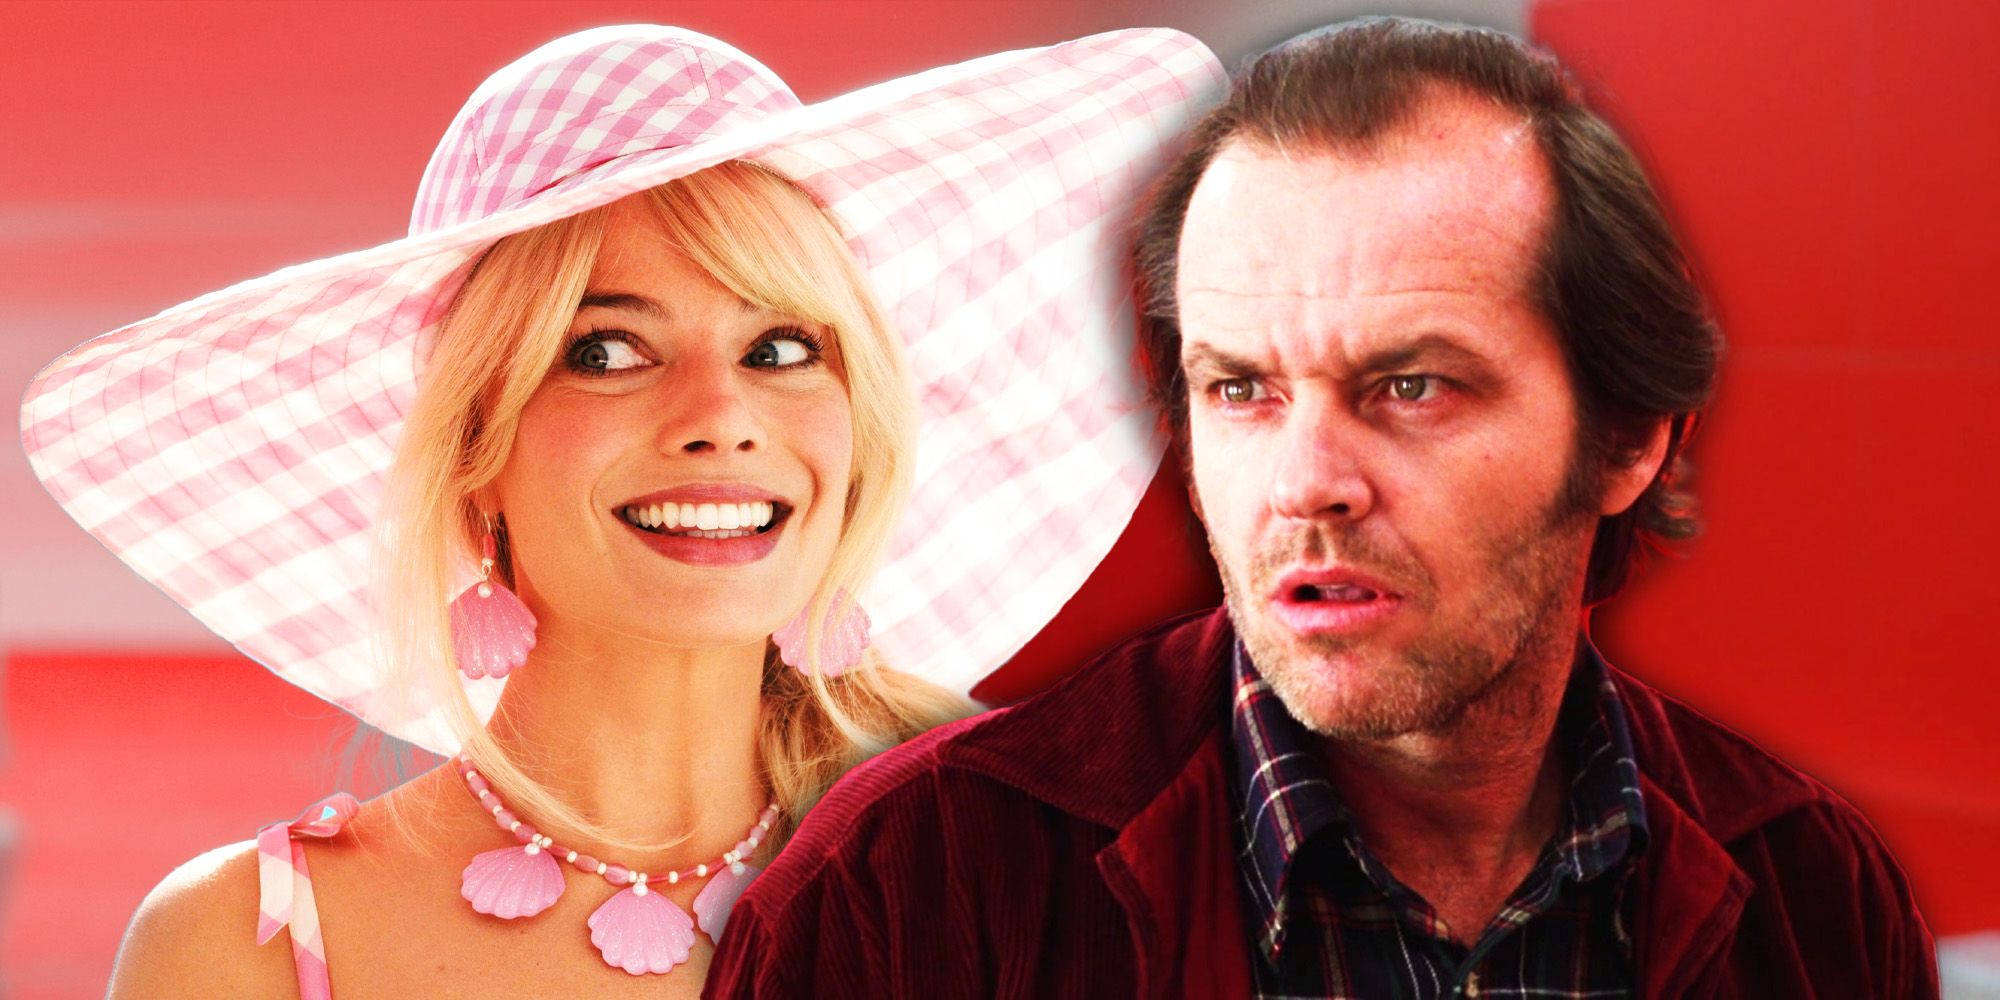 Happy Barbie and confused Jack Torrance in The Shining